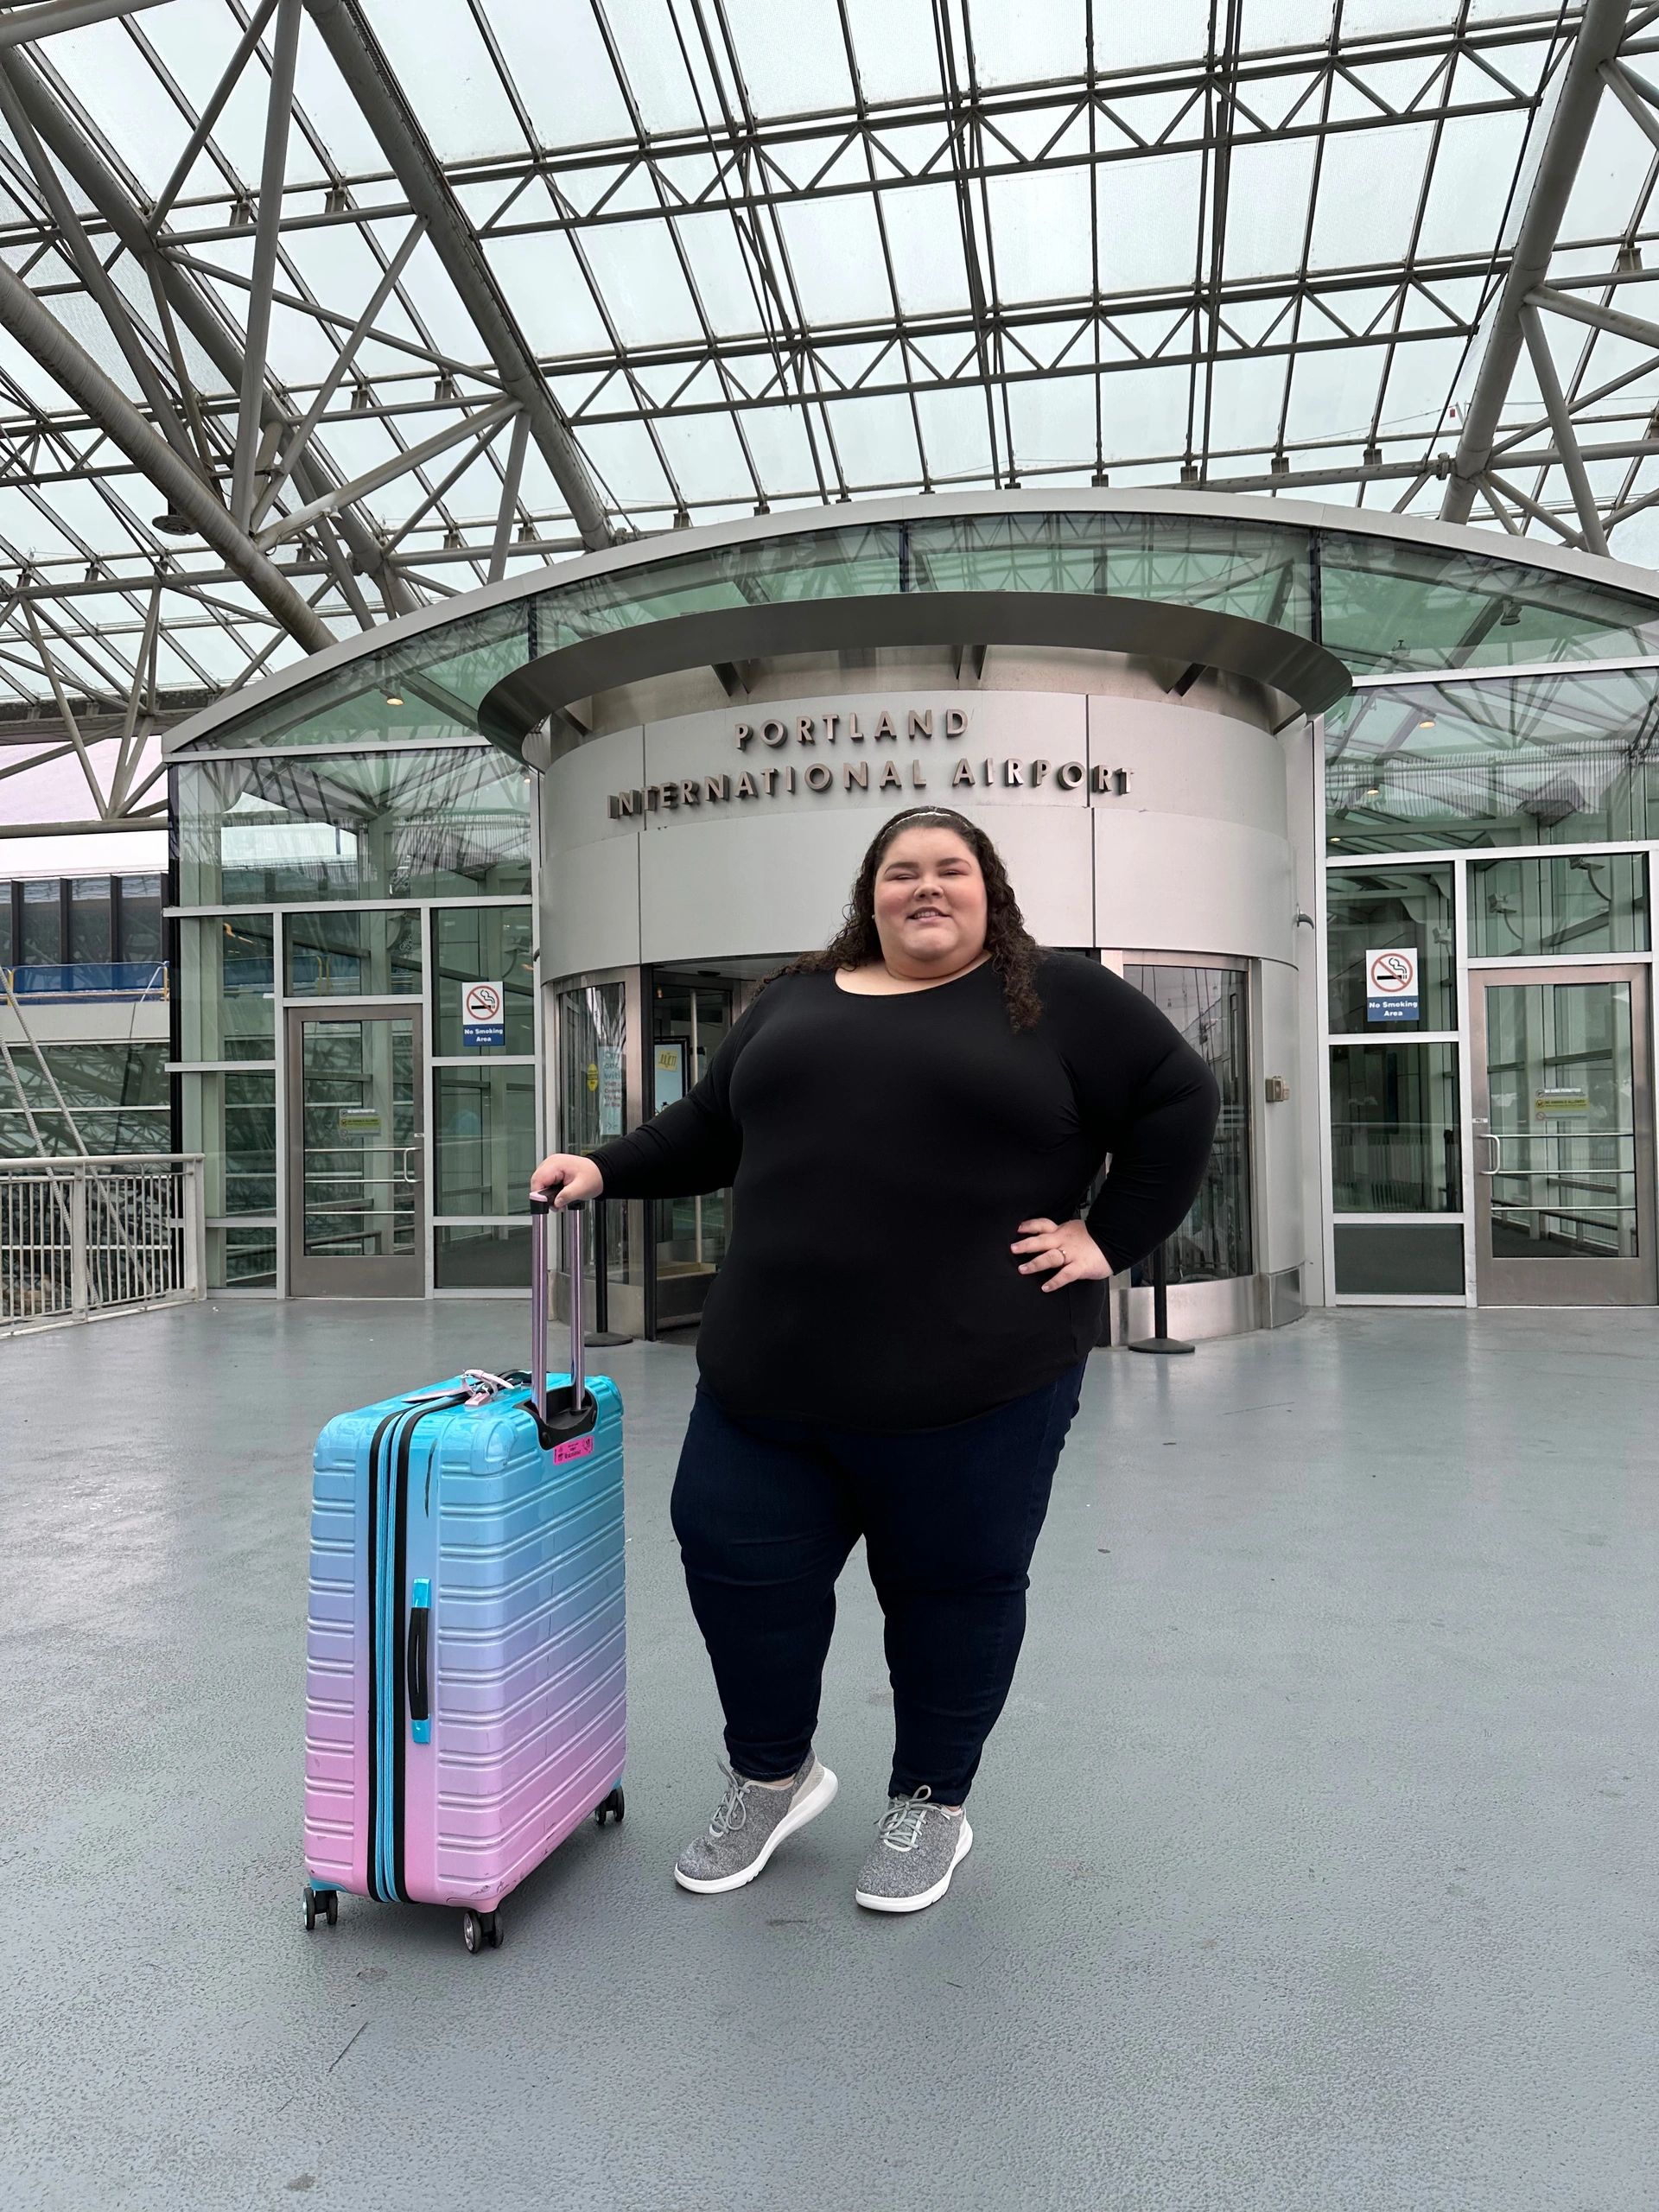 Vancouver travel blogger: 'We don't have to shrink ourselves